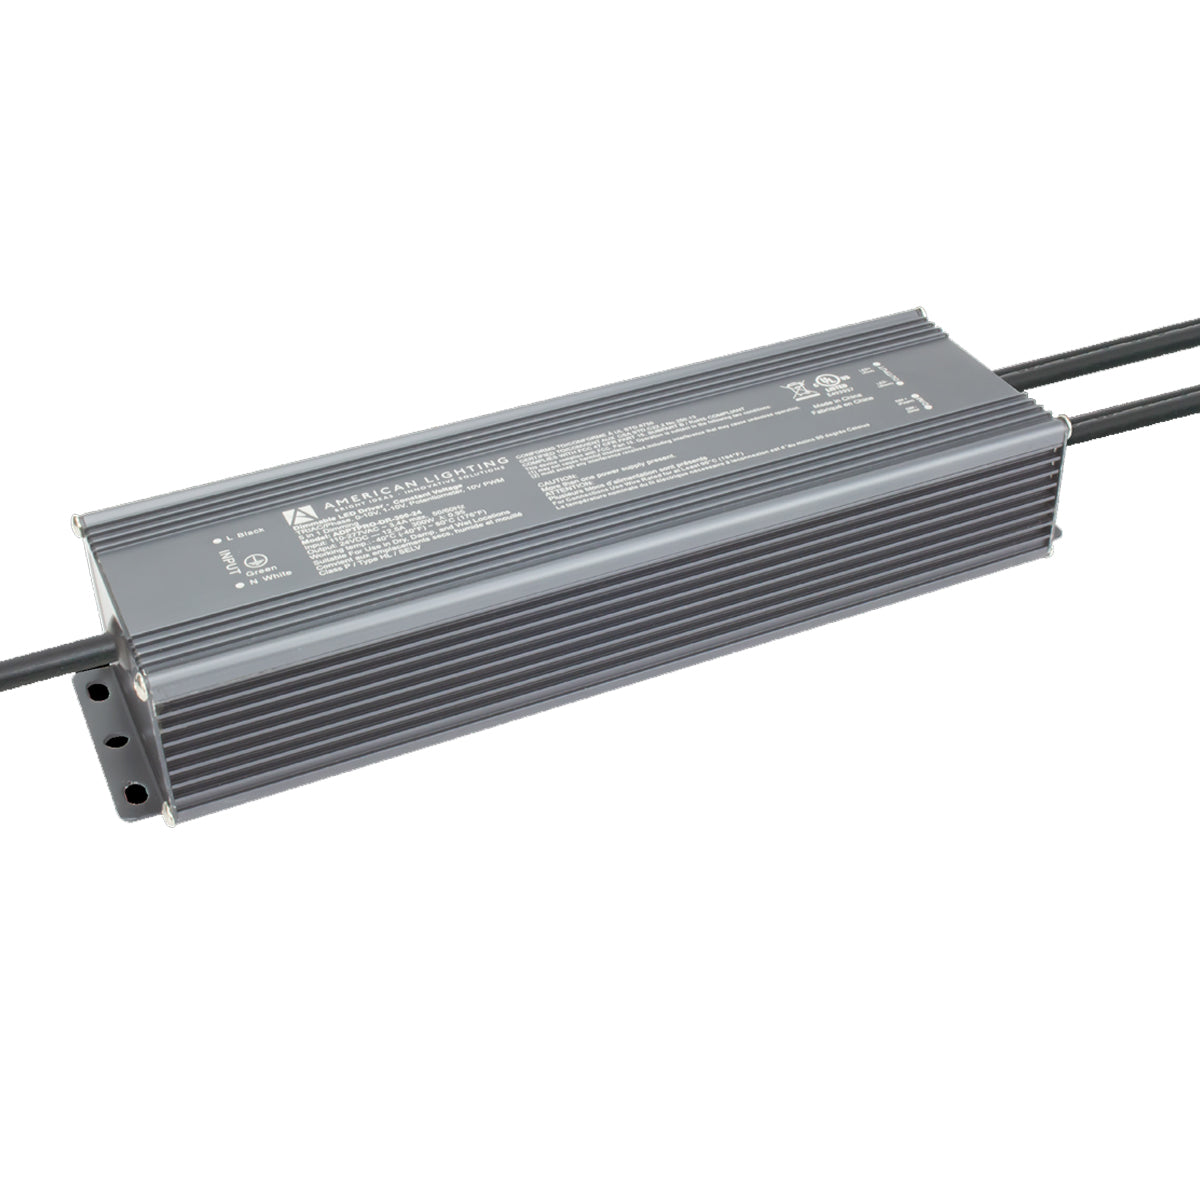 Adaptive Pro 300 Watts, 100-277V Input, 24VDC Output, 5-in-1 Dimmable Electronic LED Driver - Bees Lighting